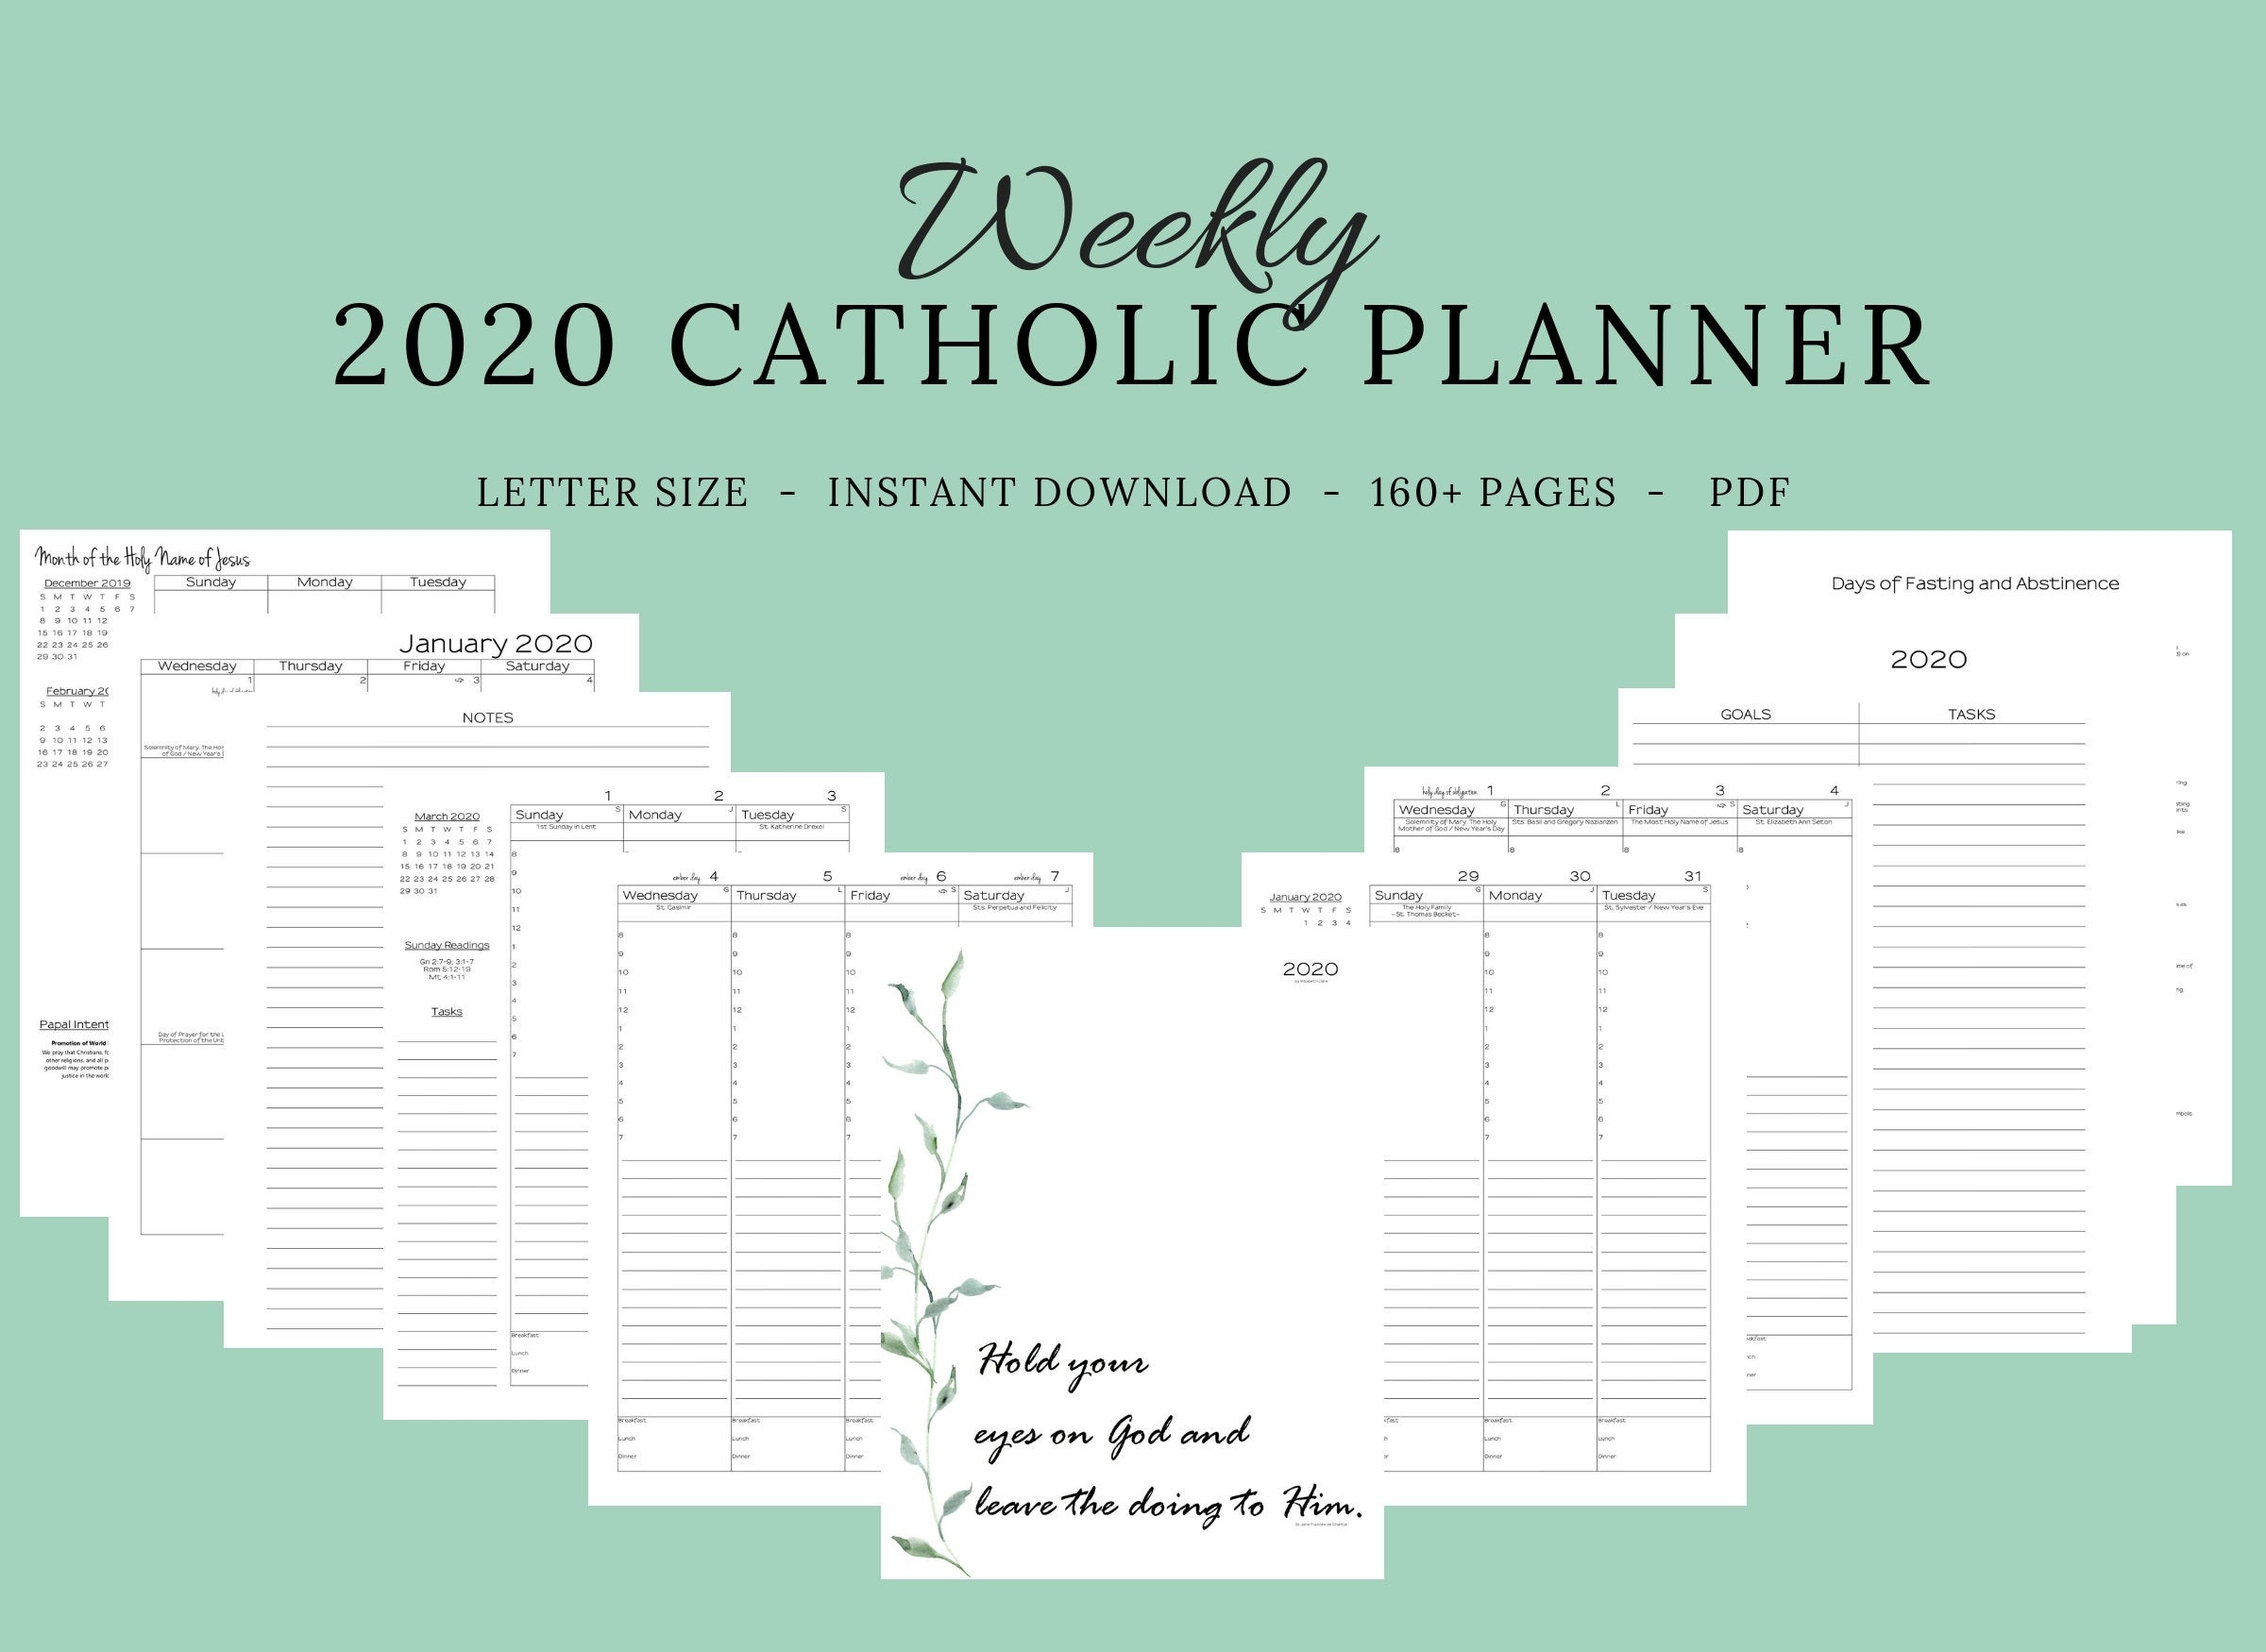 2020 Catholic Planner Weekly Printable: Daily Planner / | Etsy for Printable Liturgical Calendar 2020